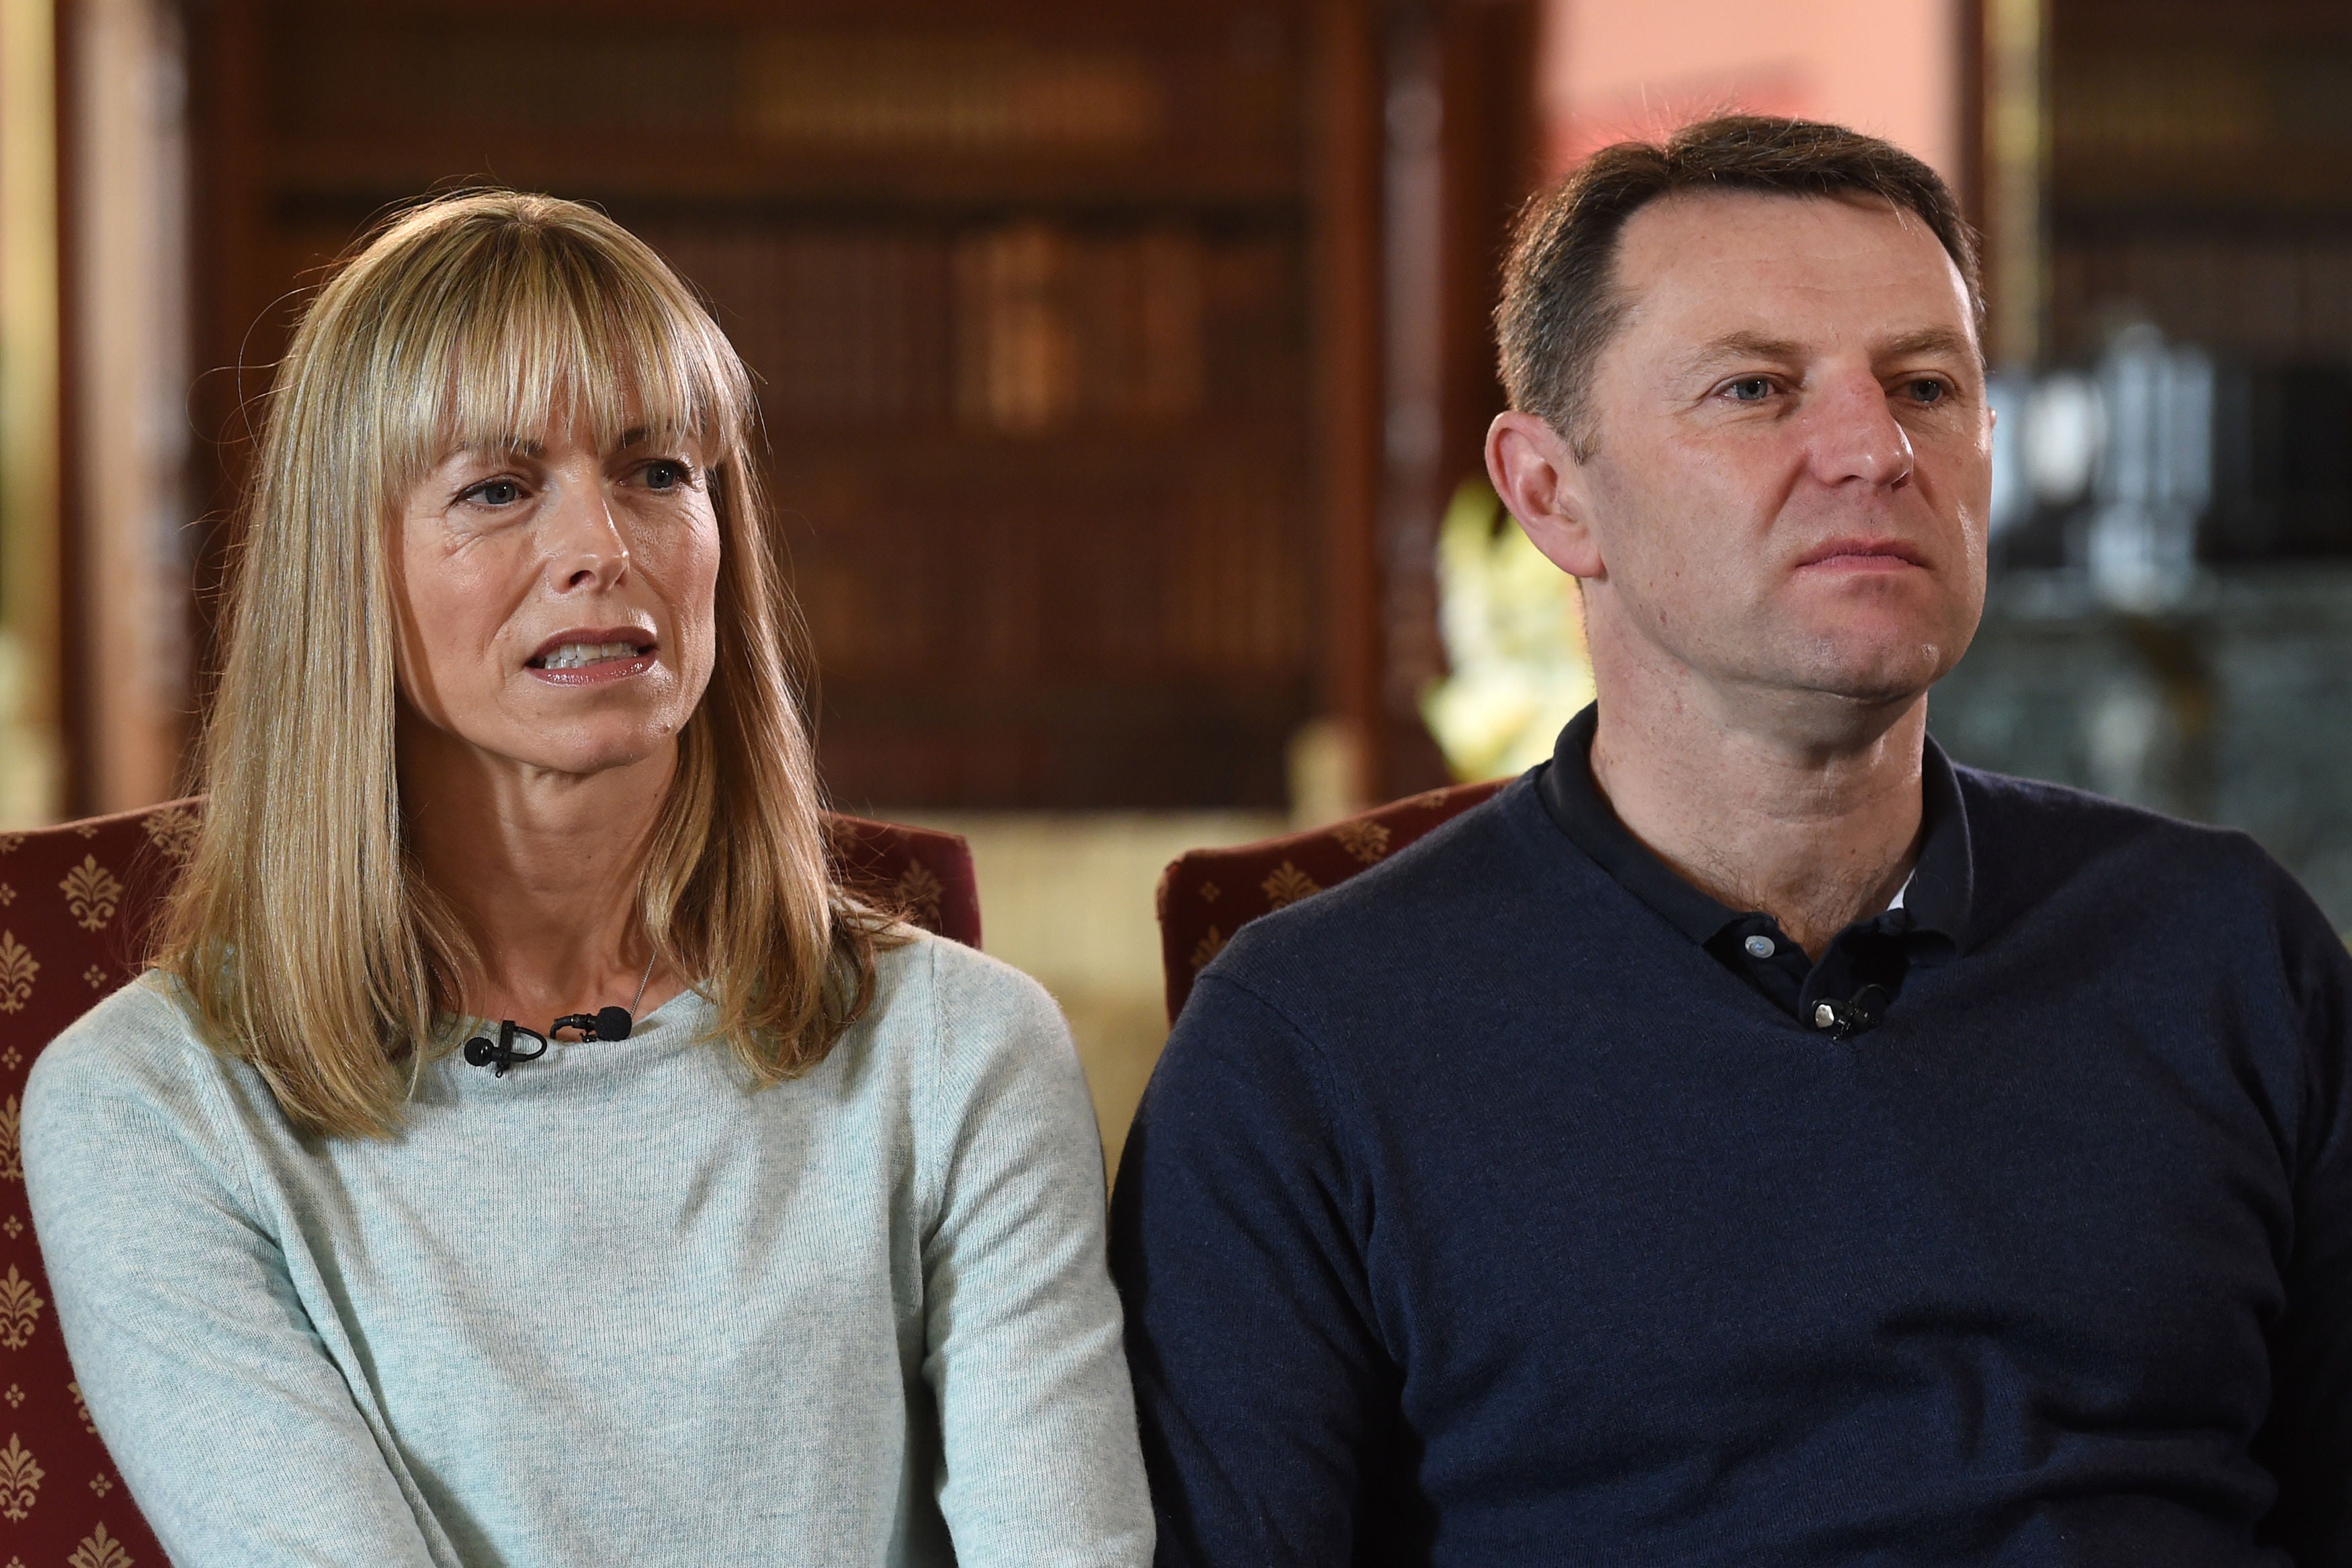 Madeleine’s parents Kate and Gerry McCann have been searching for answers ever since her disappearance